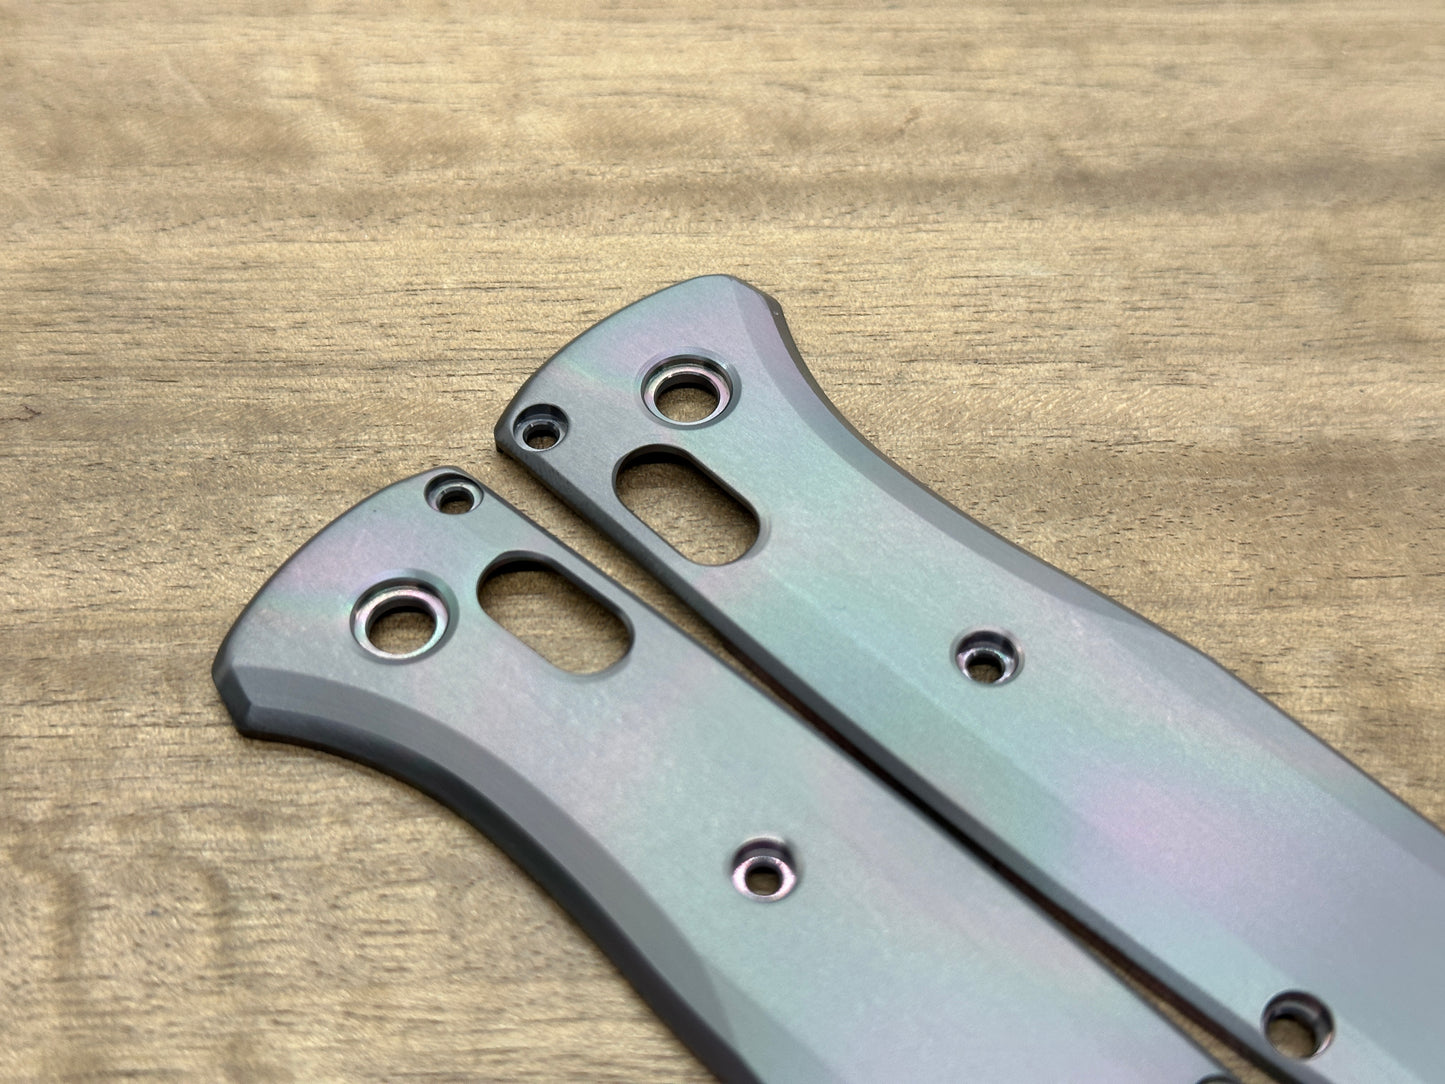 OIL SLICK Brushed Zirconium Scales for Benchmade Bugout 535